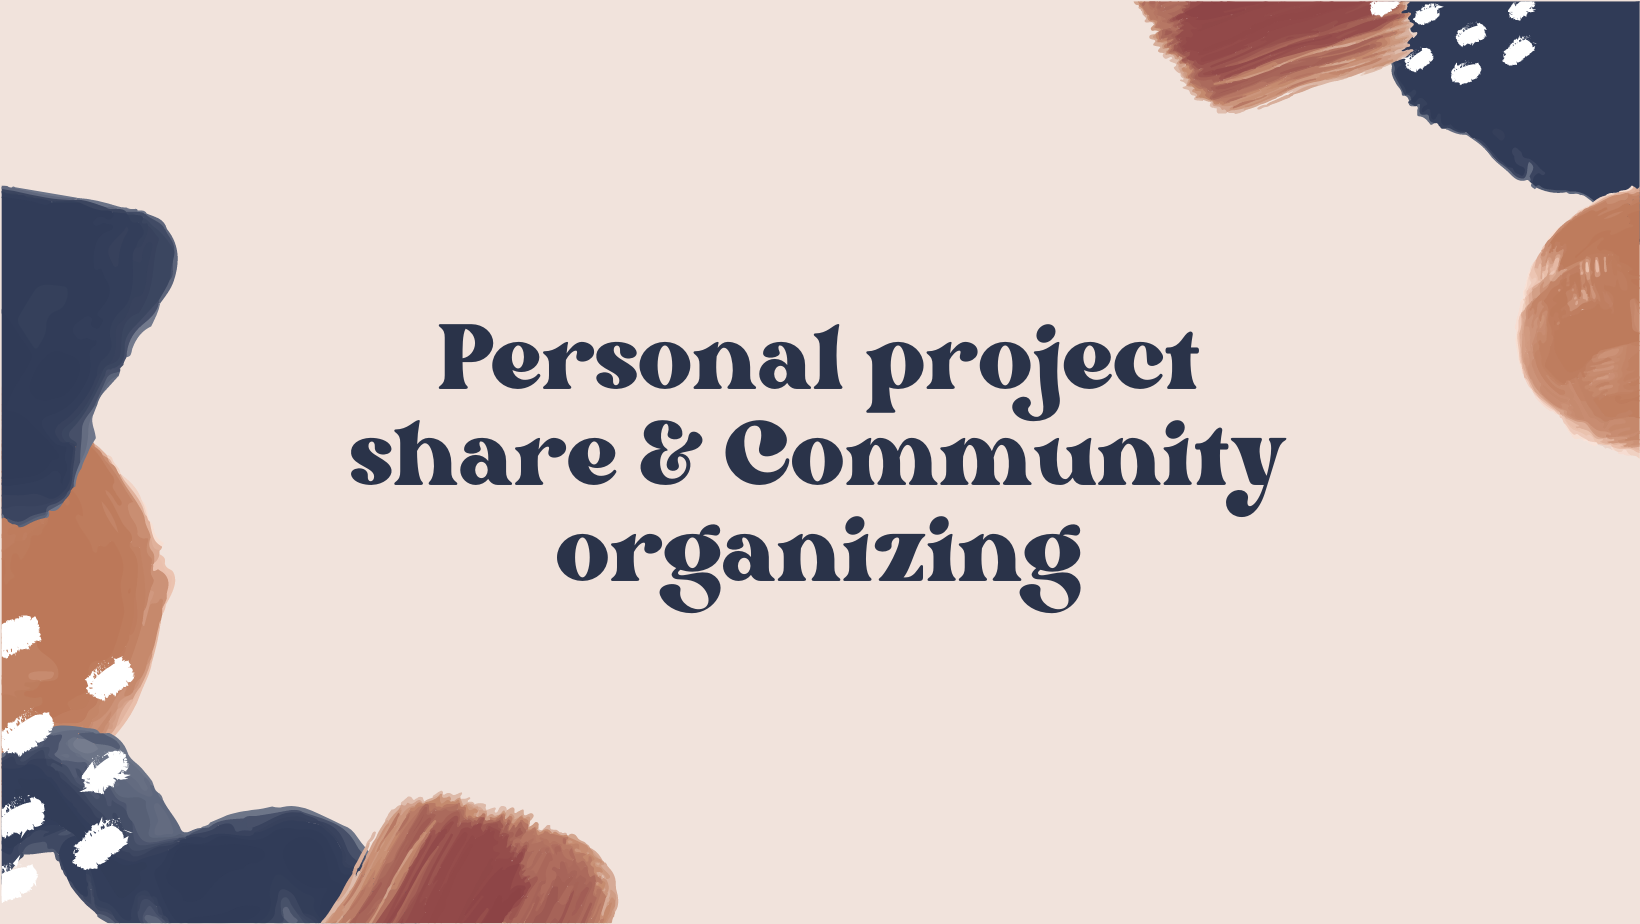 Personal project share & Community organizing